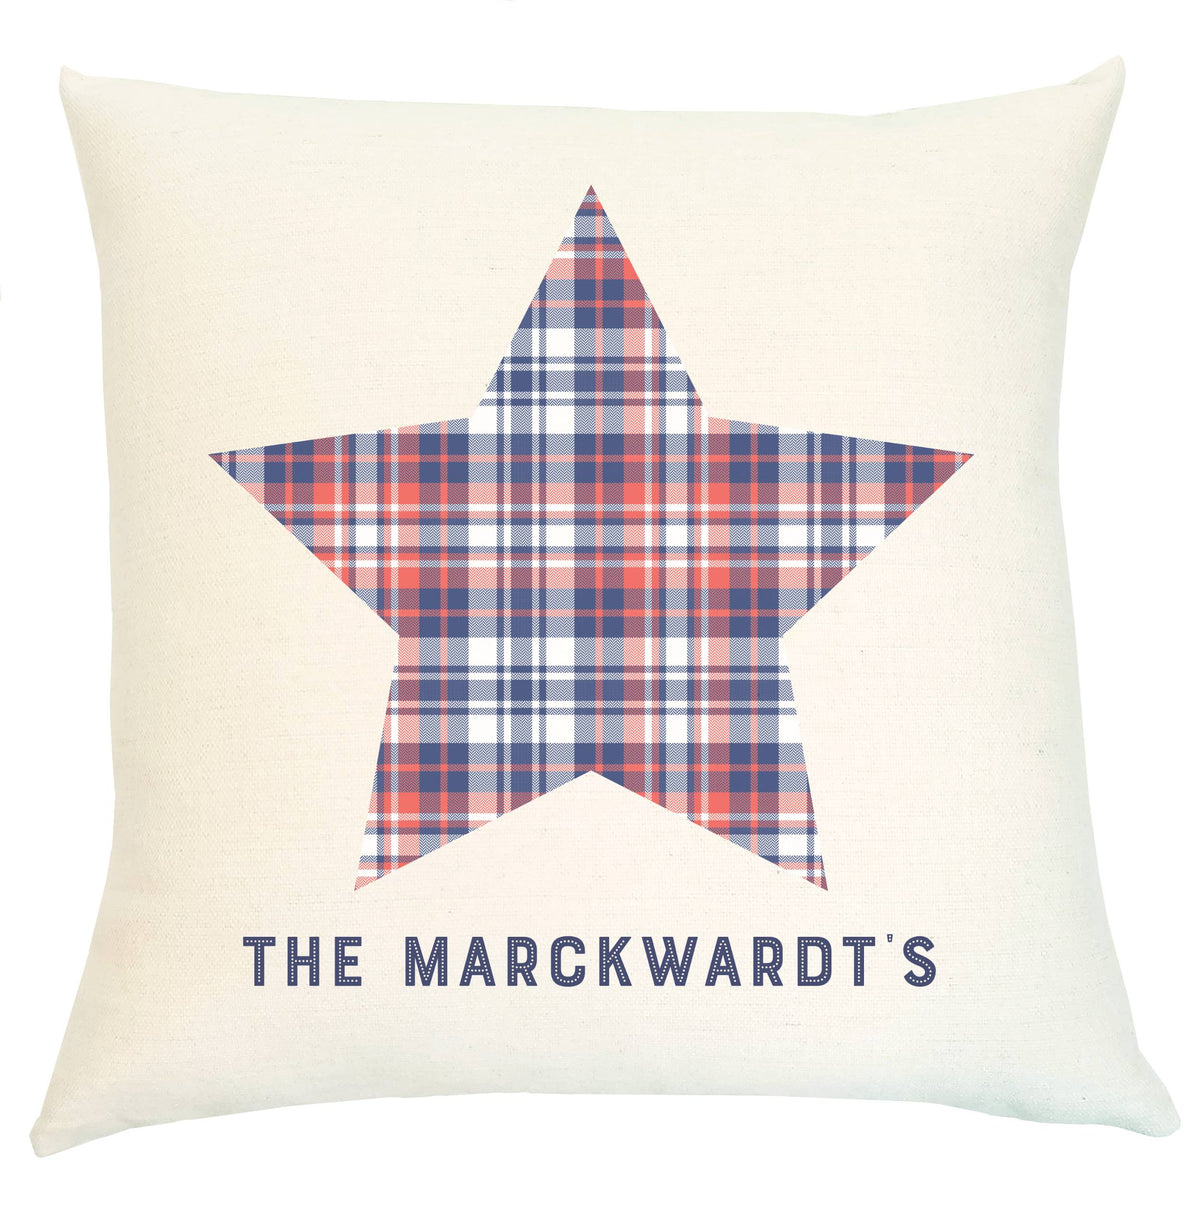 Pillow Personalized - Everyday Heroes with Plaid Star